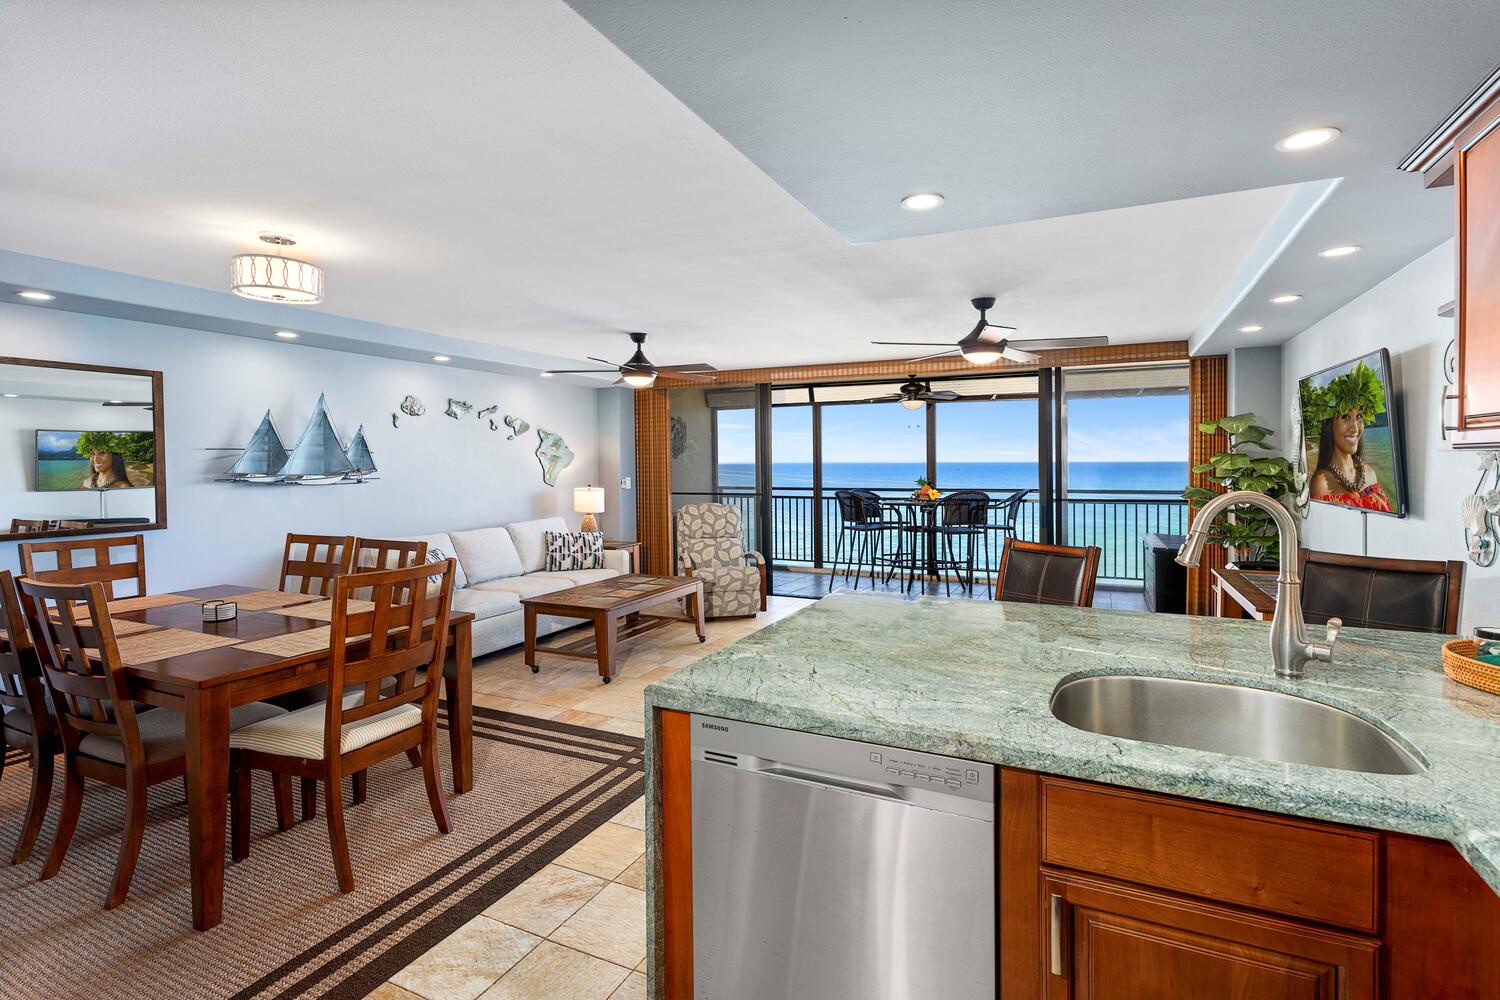 Kailua Kona Vacation Rentals, Kona Alii 403 - The view from the kitchen area, making meal prepping more exciting.